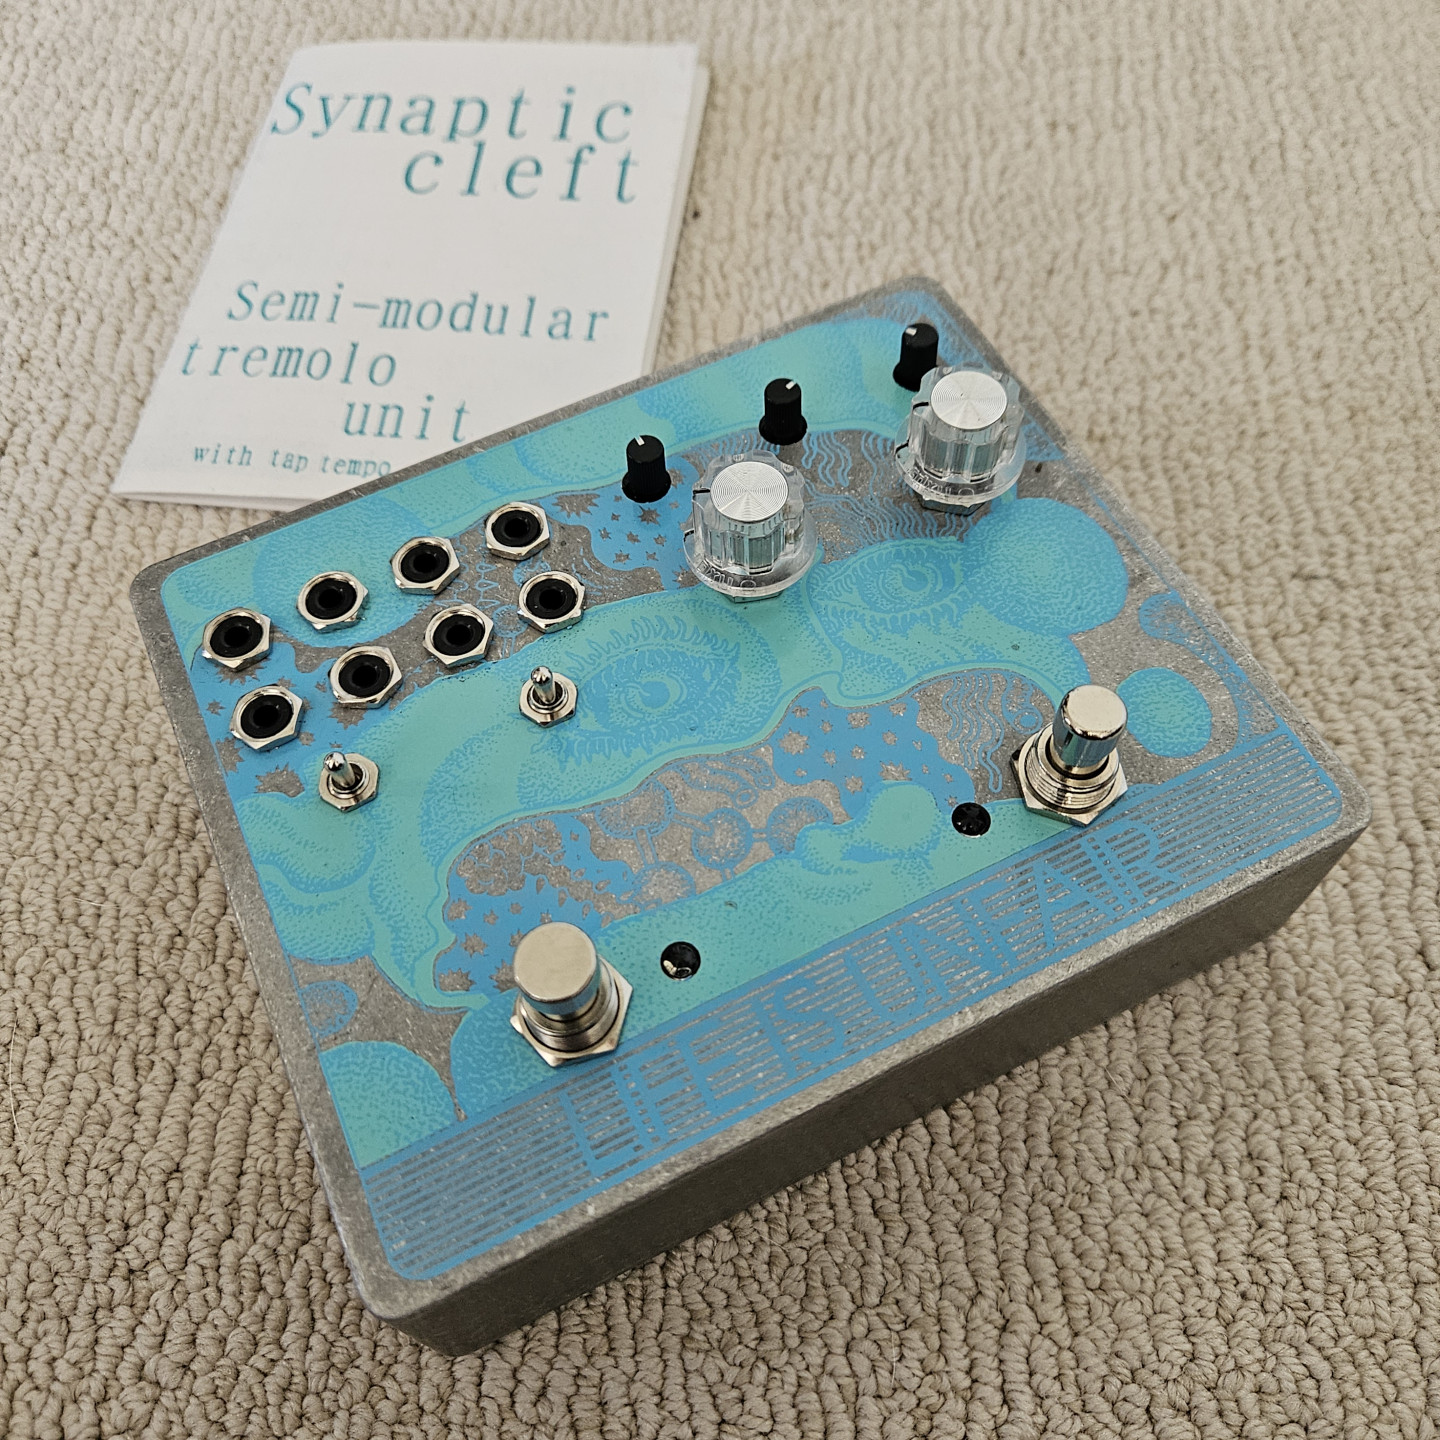 Life is Unfair Audio Synaptic Cleft Semi-Modular Tremolo Unit Guitar Effects Pedal